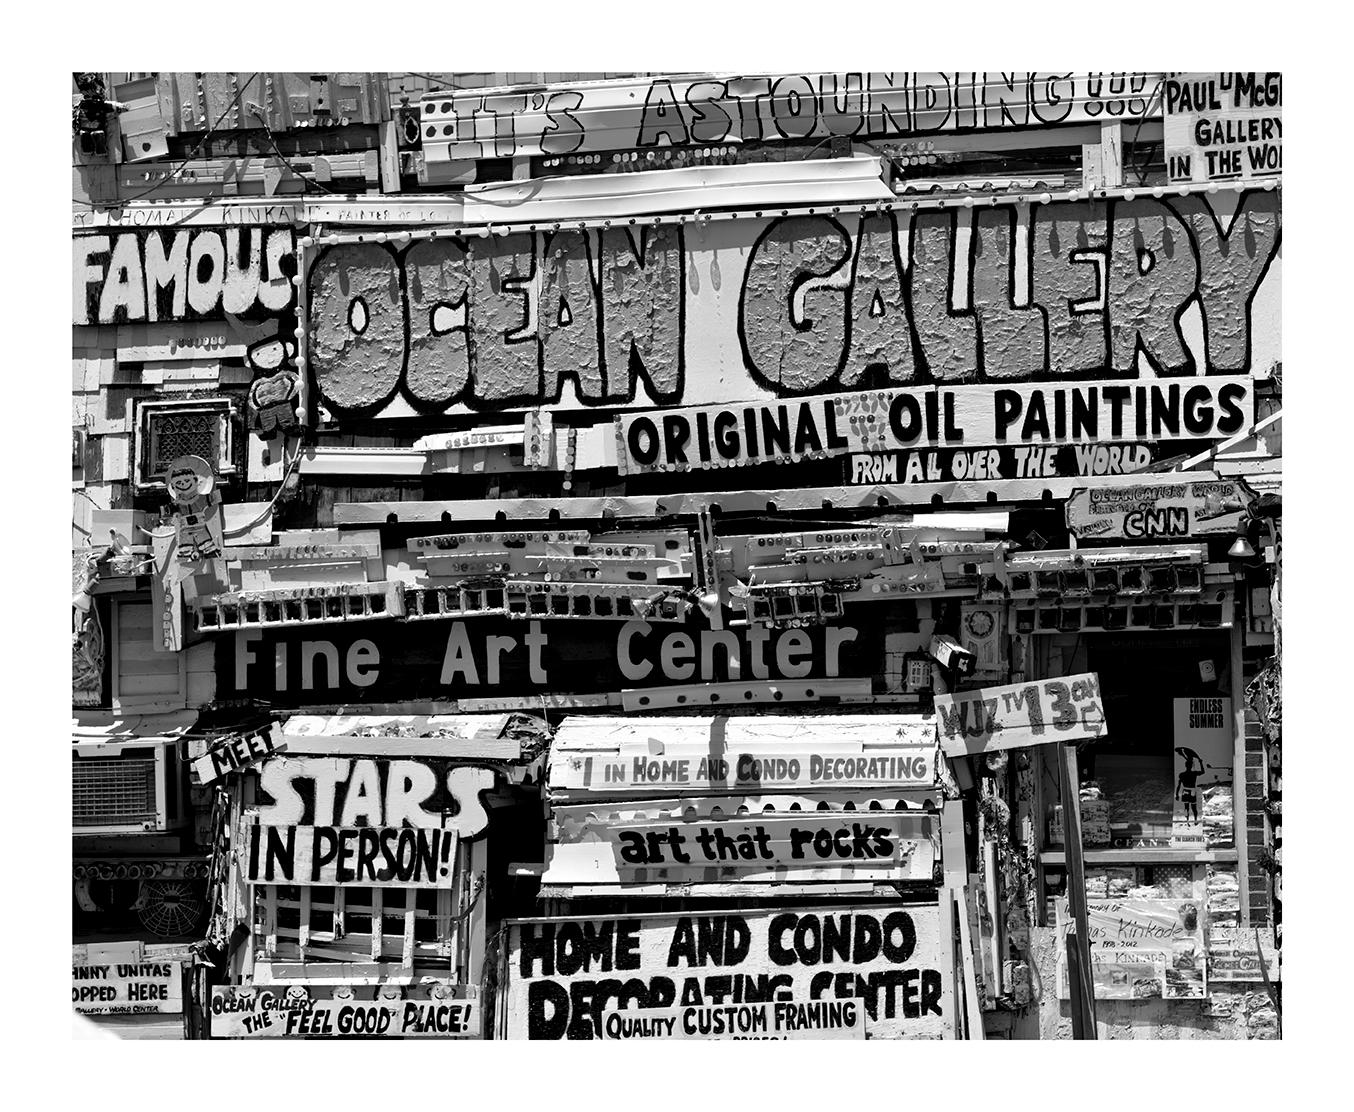 "Art By the Pound". The "Famous" Ocean Gallery on the Boardwalk, Ocean City, Maryland